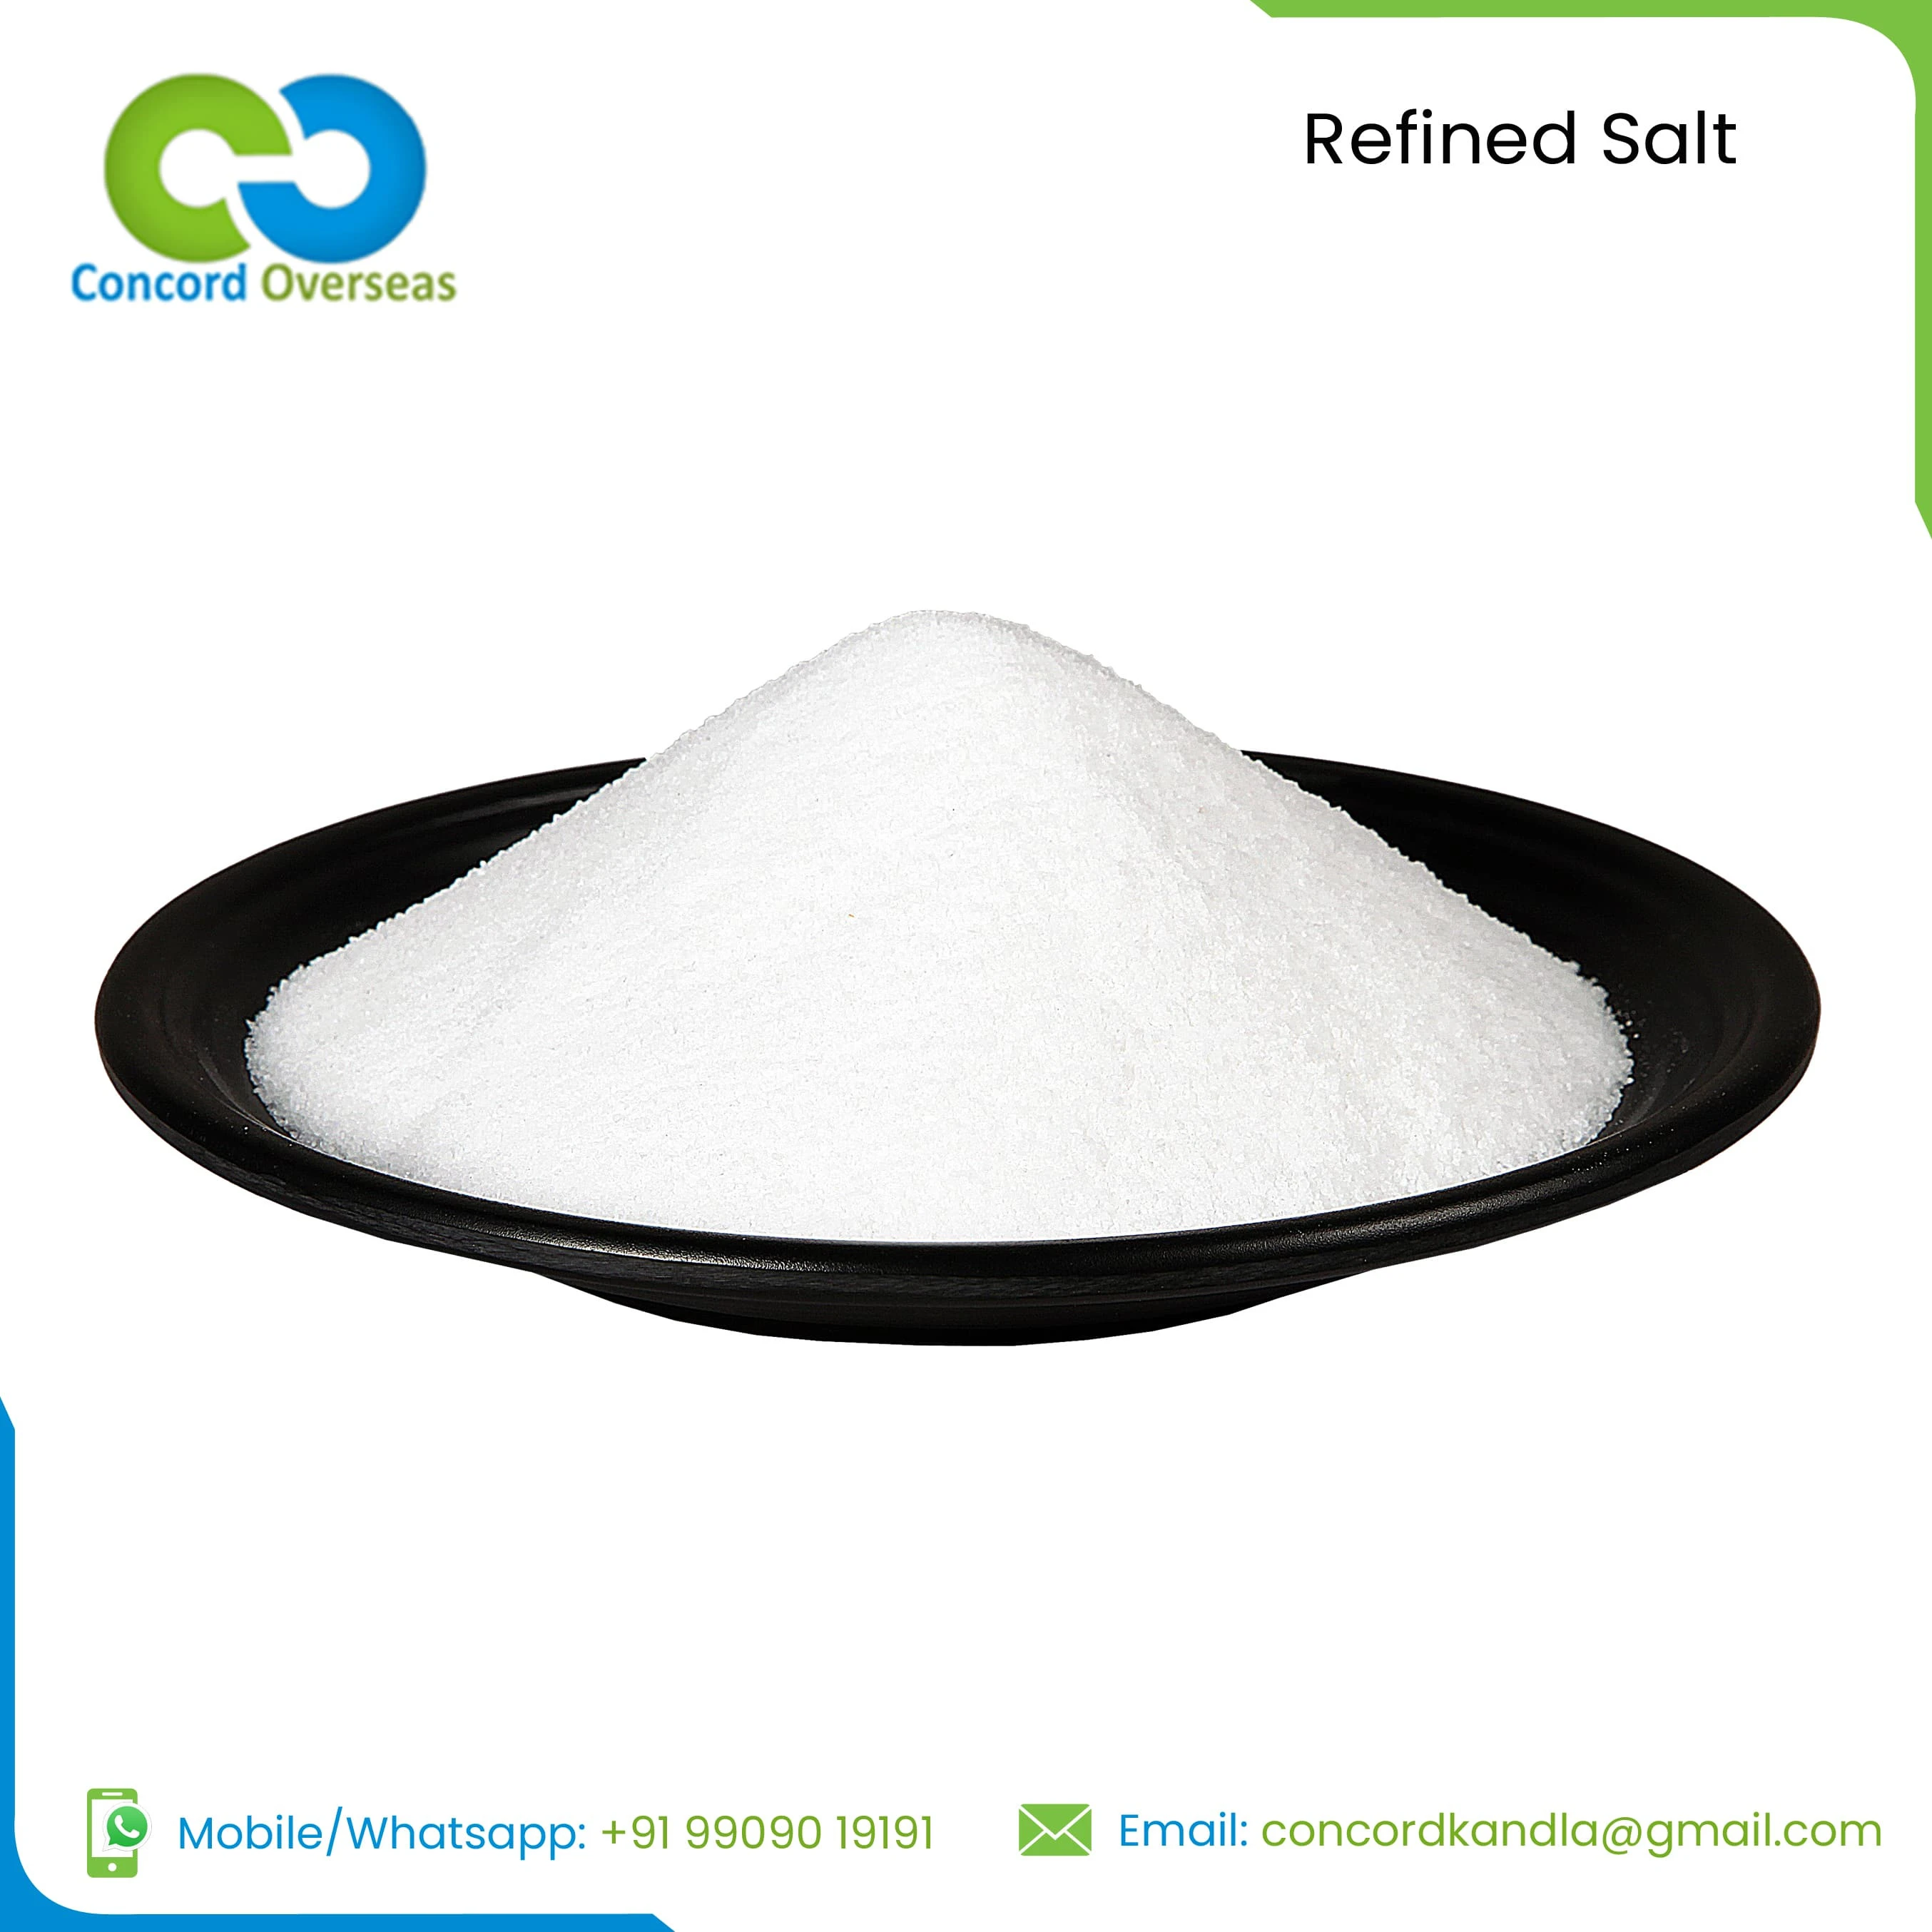 Global Exports of ISO Certified Refined Iodized Salt at Best Price from Leading Brand